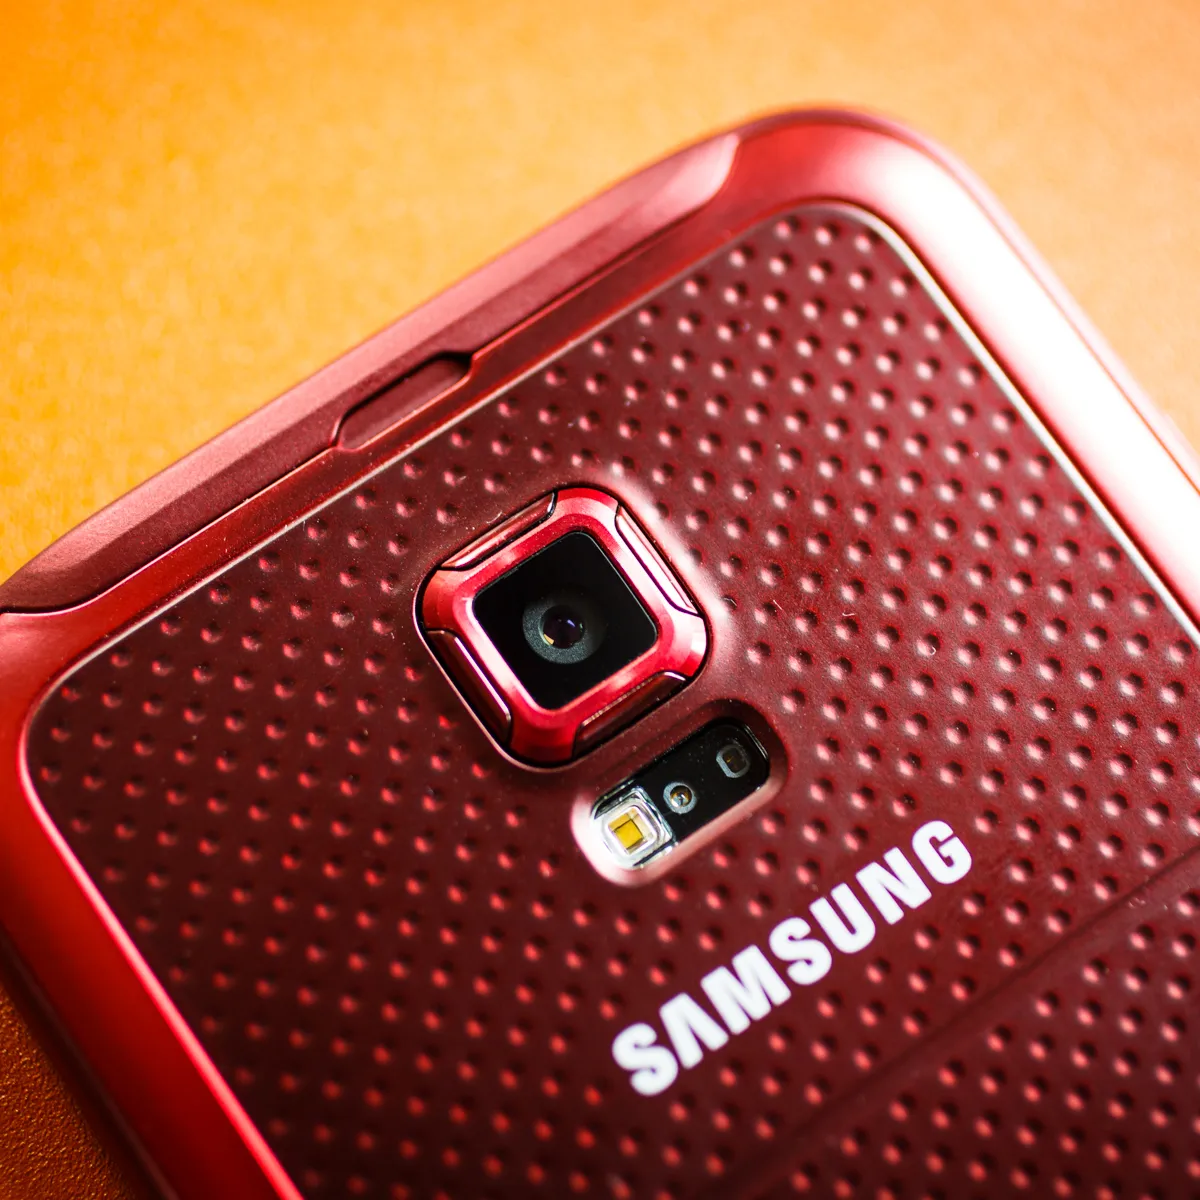 After a system update, the Samsung Galaxy S5 Sport does not vibrate.